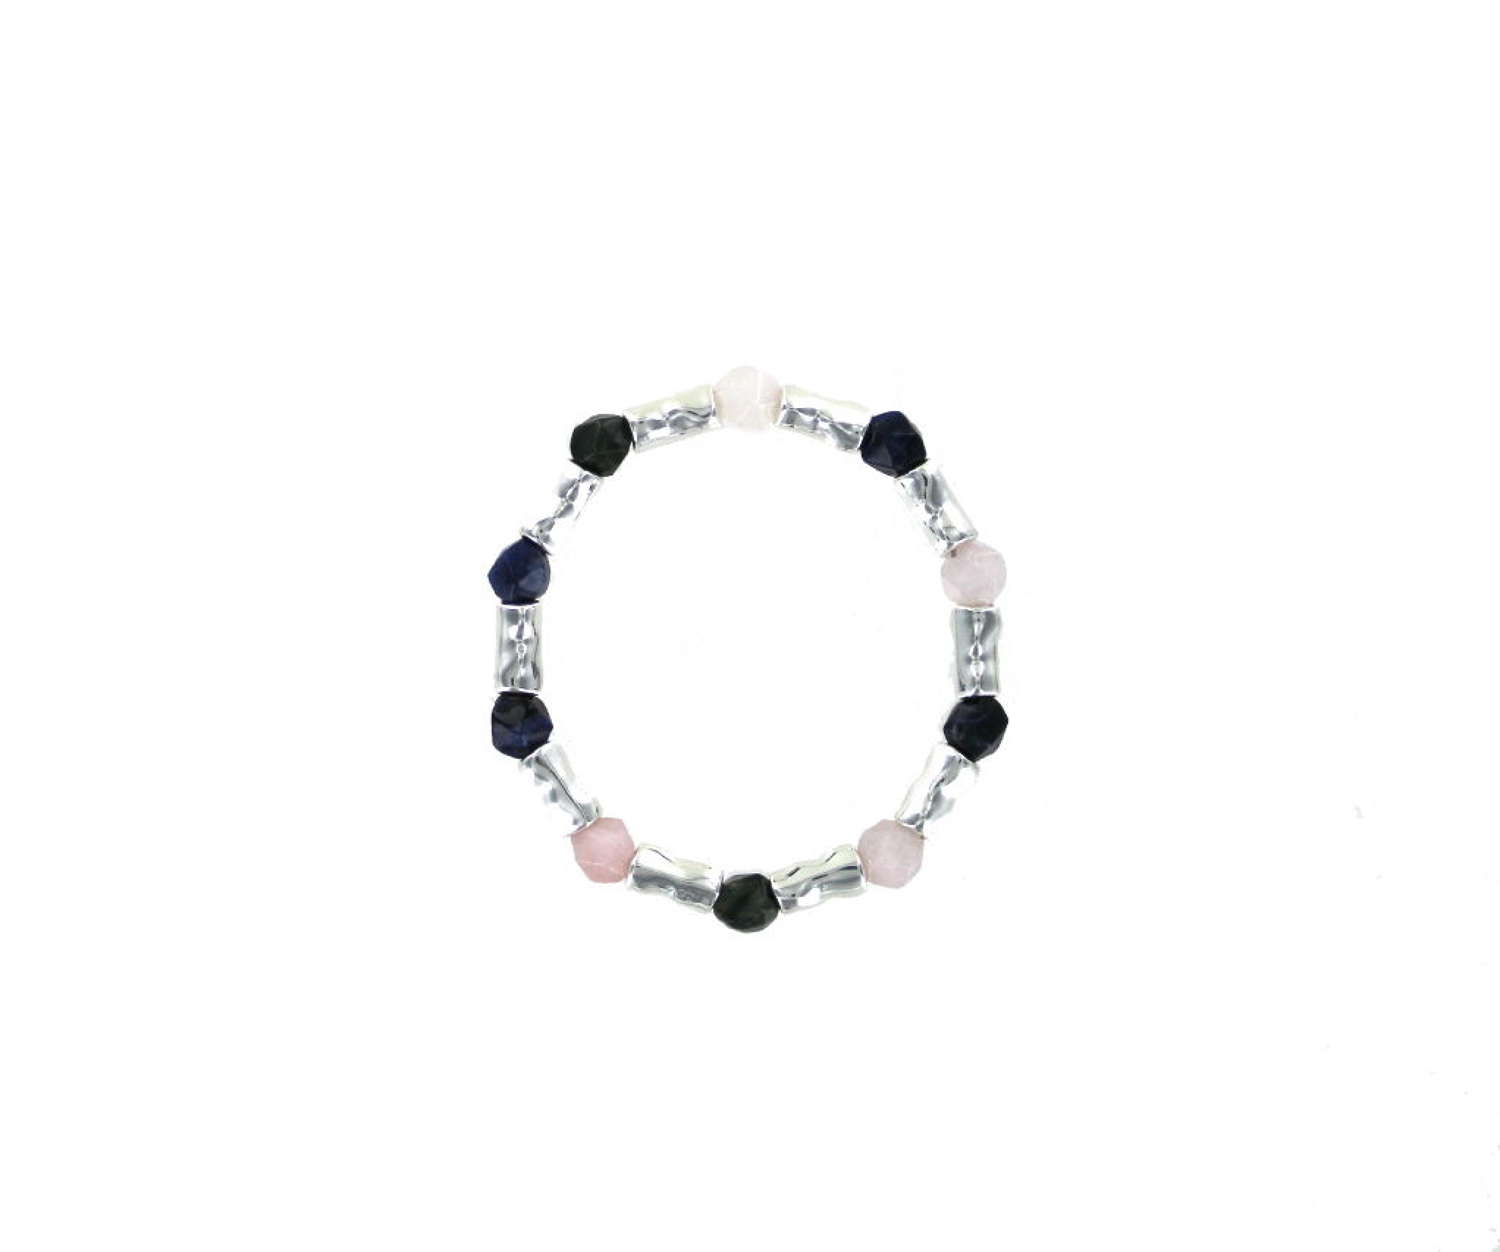 Natural stone bead and silver tone elasticated bracelet.